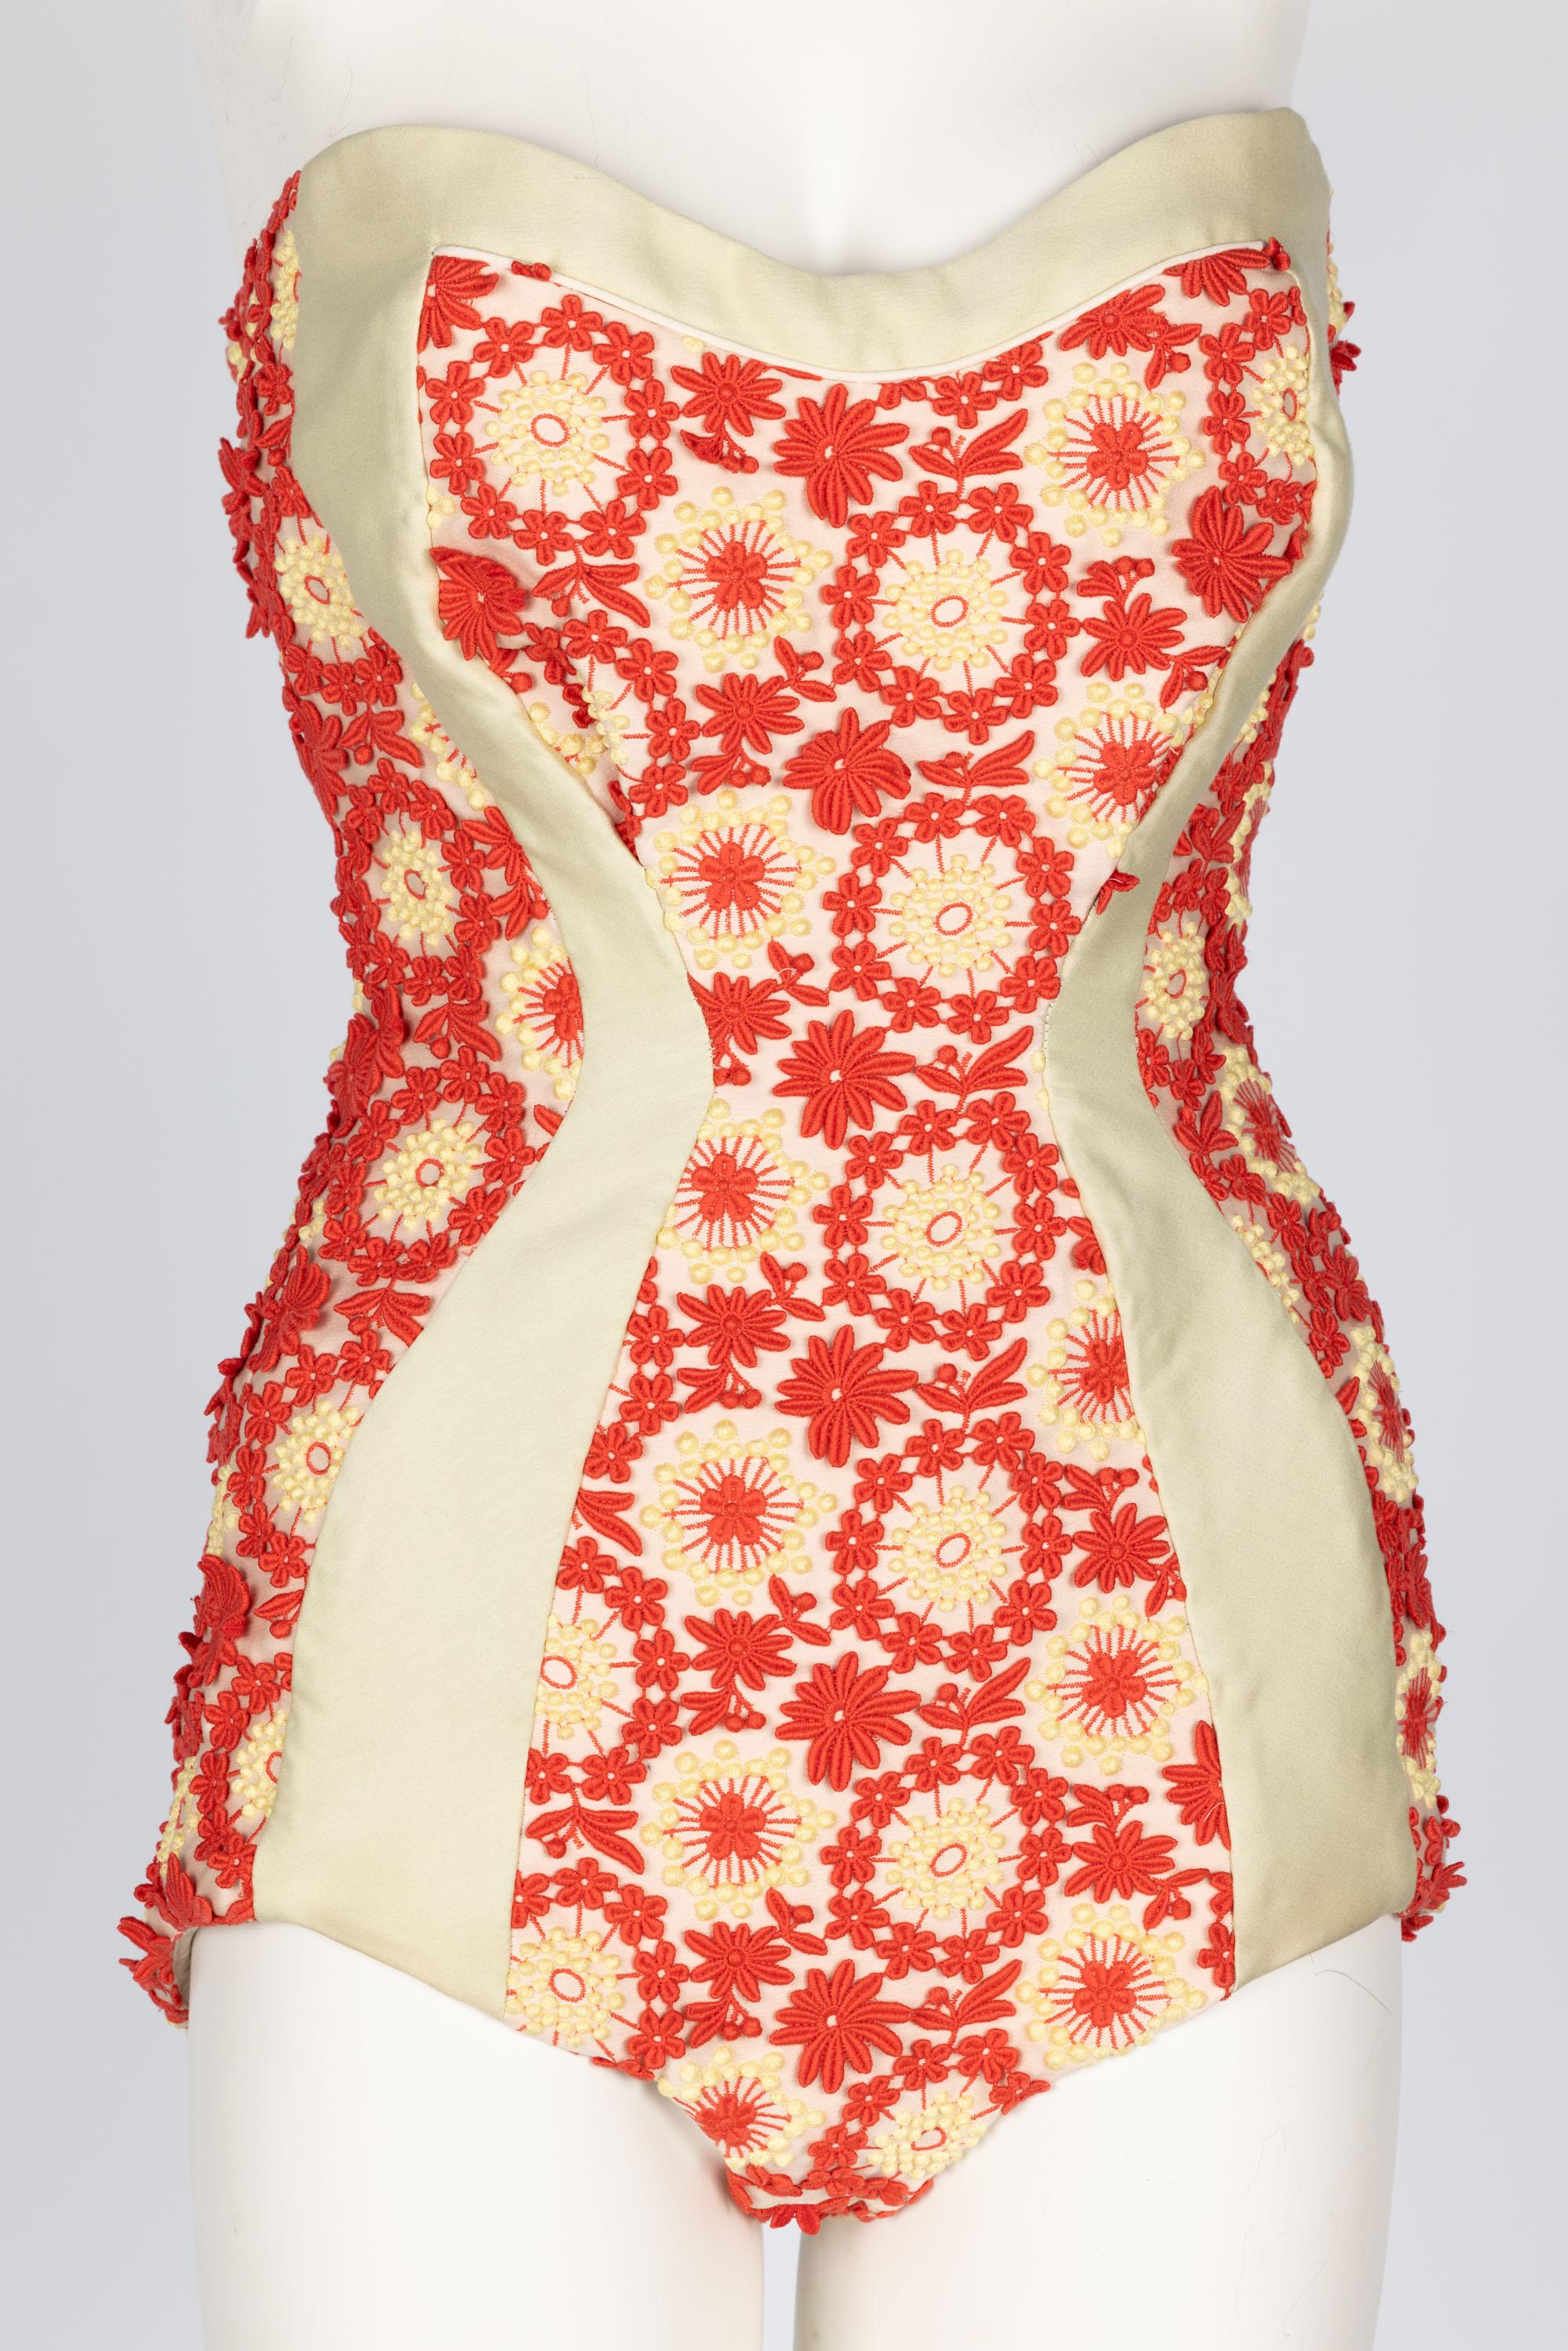 Prada Most Wanted Spring 2012 Floral Embroidered Pinup Bodysuit In Excellent Condition For Sale In Boca Raton, FL